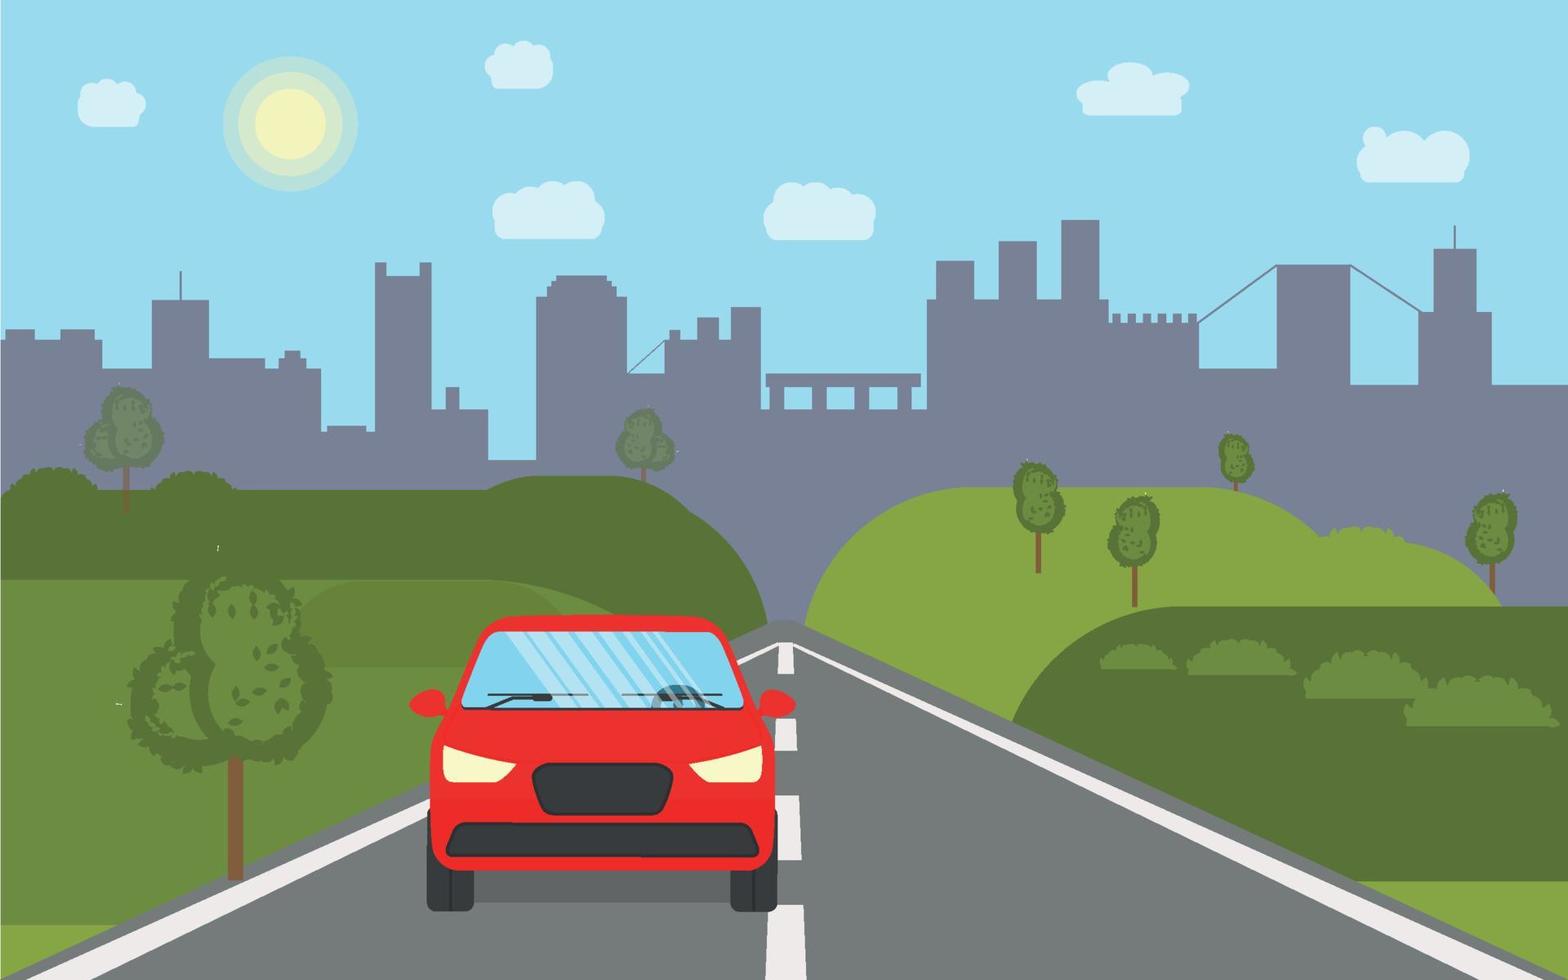 Landscape street with a car on the road, with green trees and a city in the background. Vector illustration